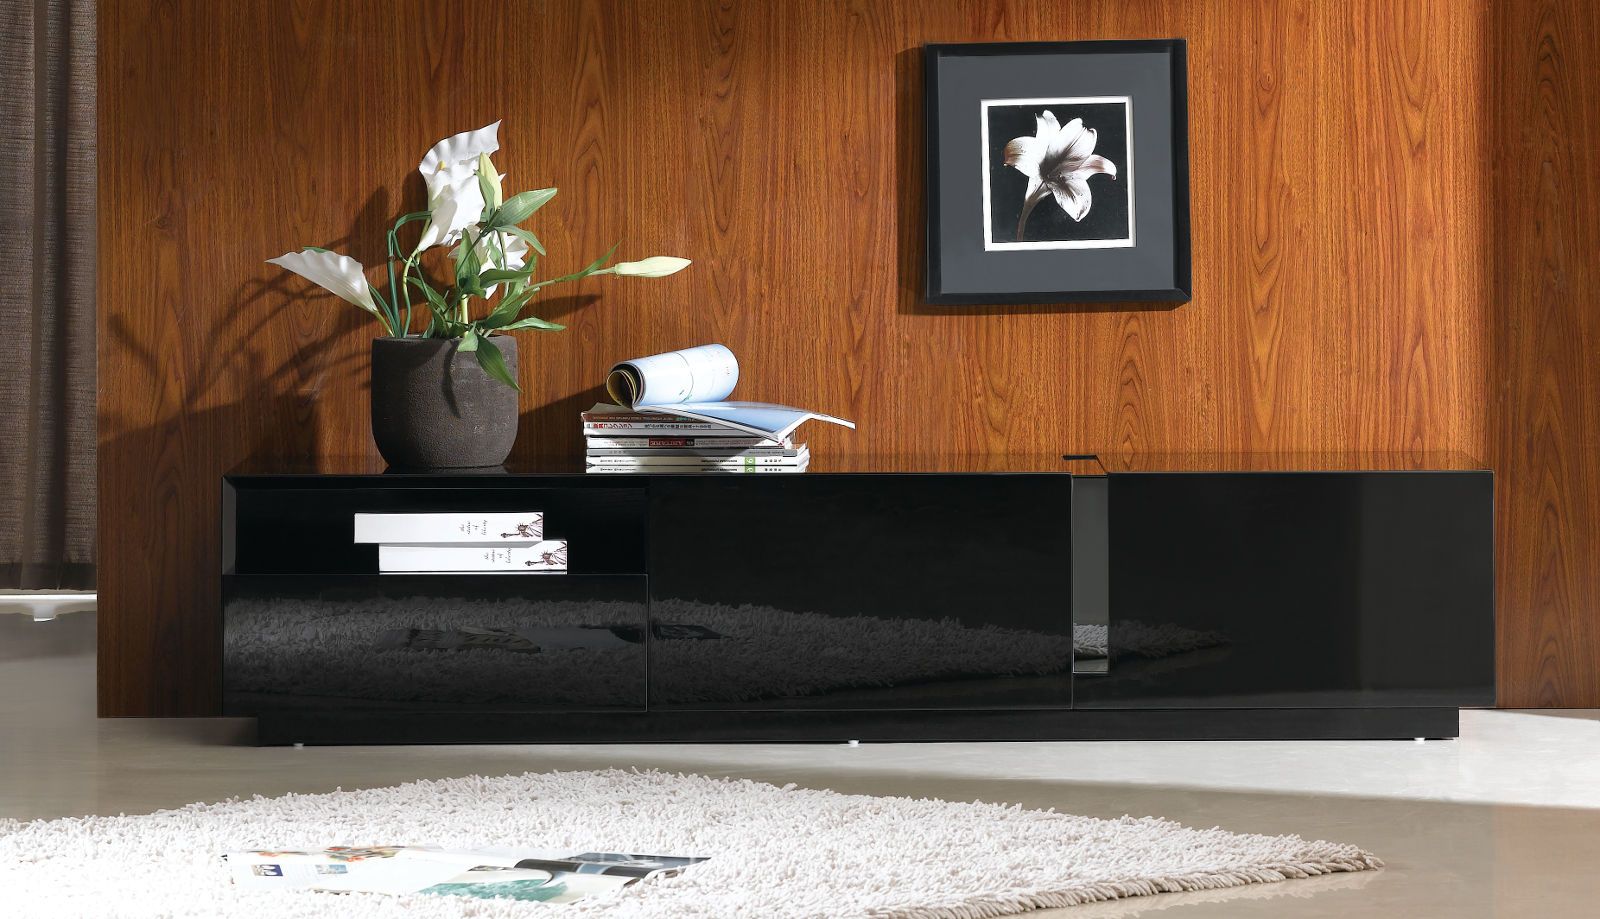 J&m Tv027 Tv Stand In Black High Gloss 176391 For Black Gloss Tv Stand (View 9 of 15)